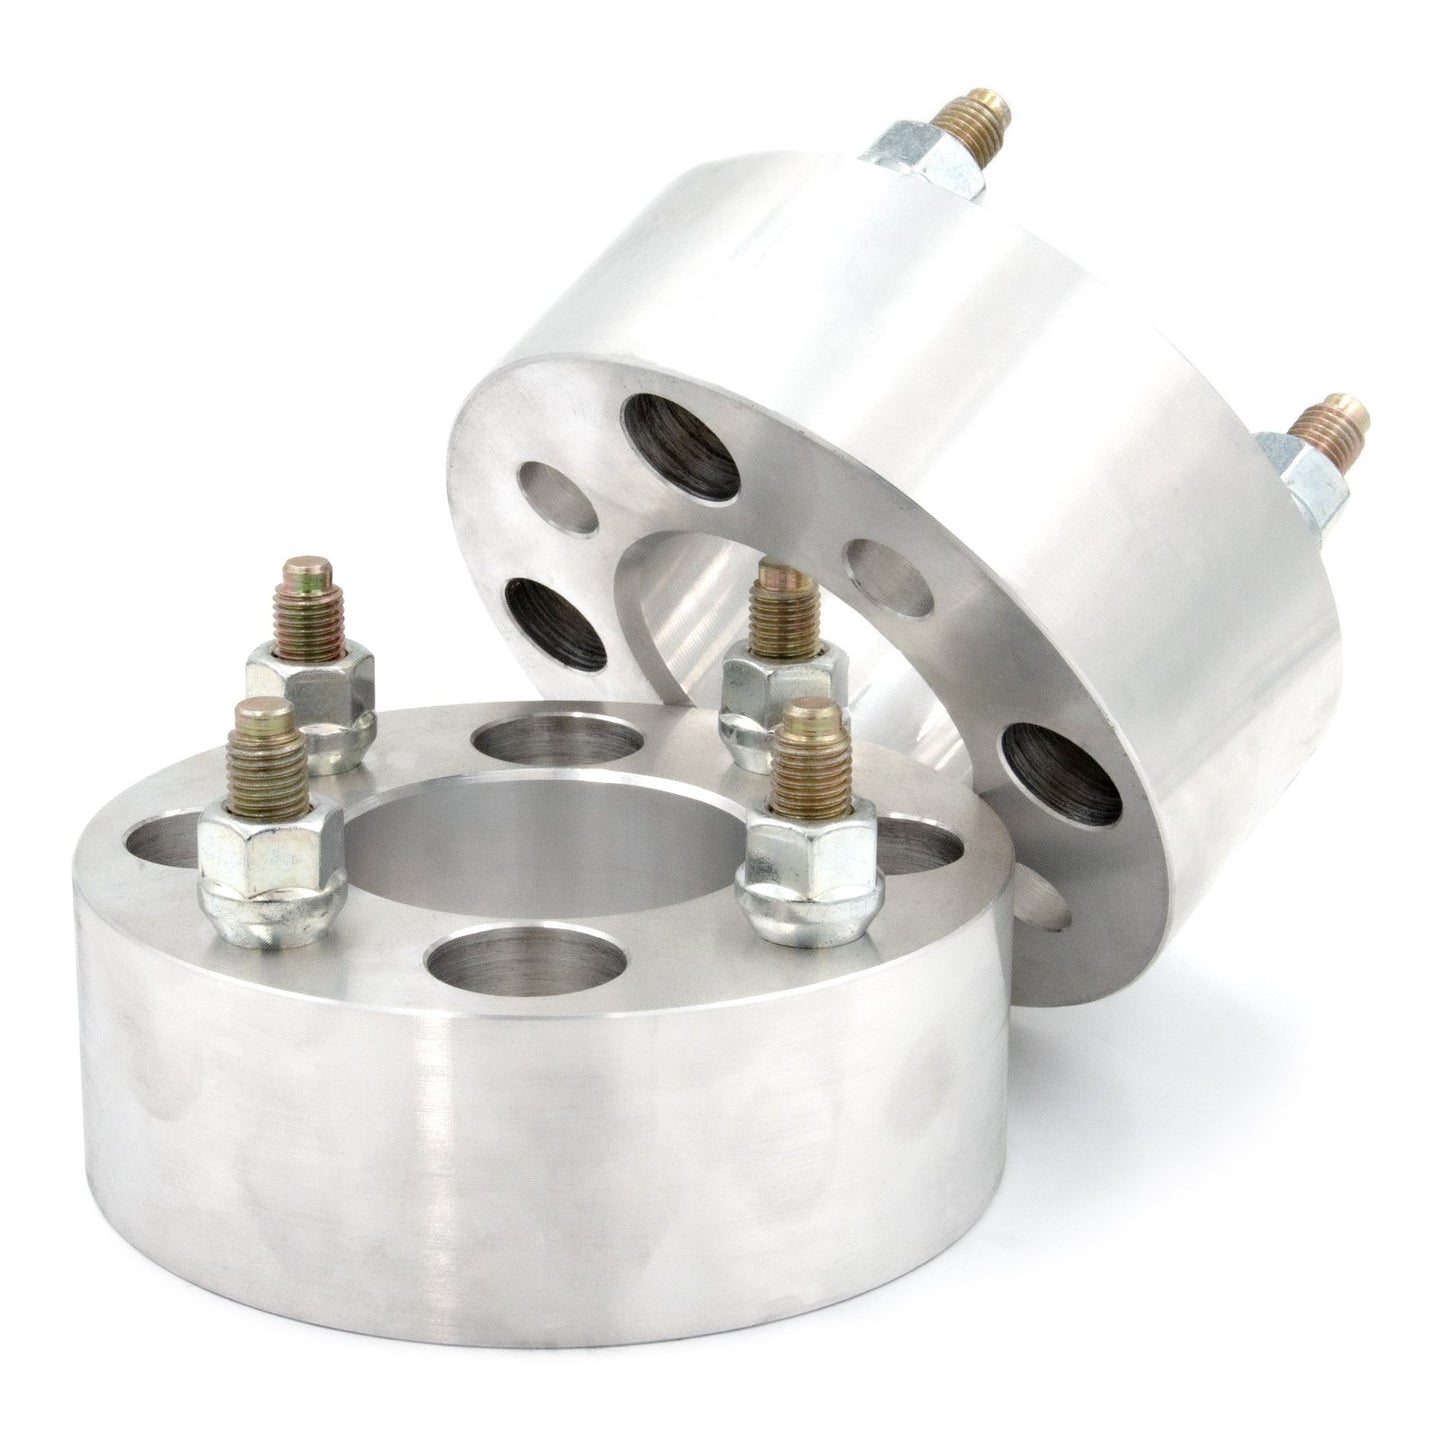 4x110 to 4x110 Wheel Spacer/Adapter - Thickness: 3/4"- 4"